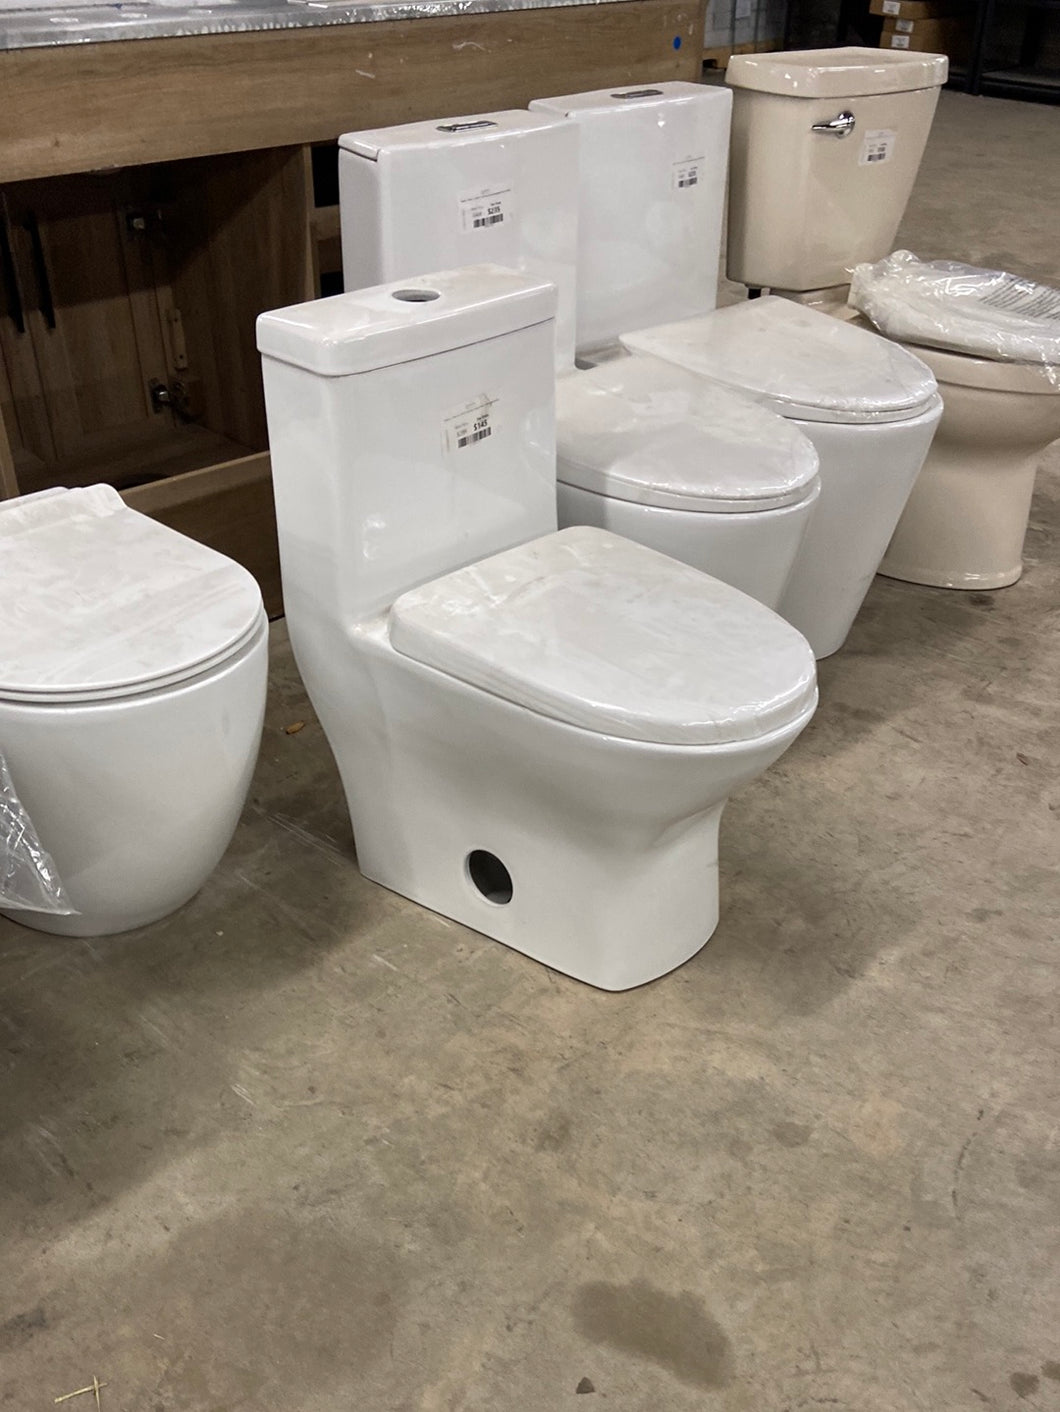 Sublime II 1-Piece 0.8/1.28 GPF Dual Flush Compact Toilet in White, Seat Included